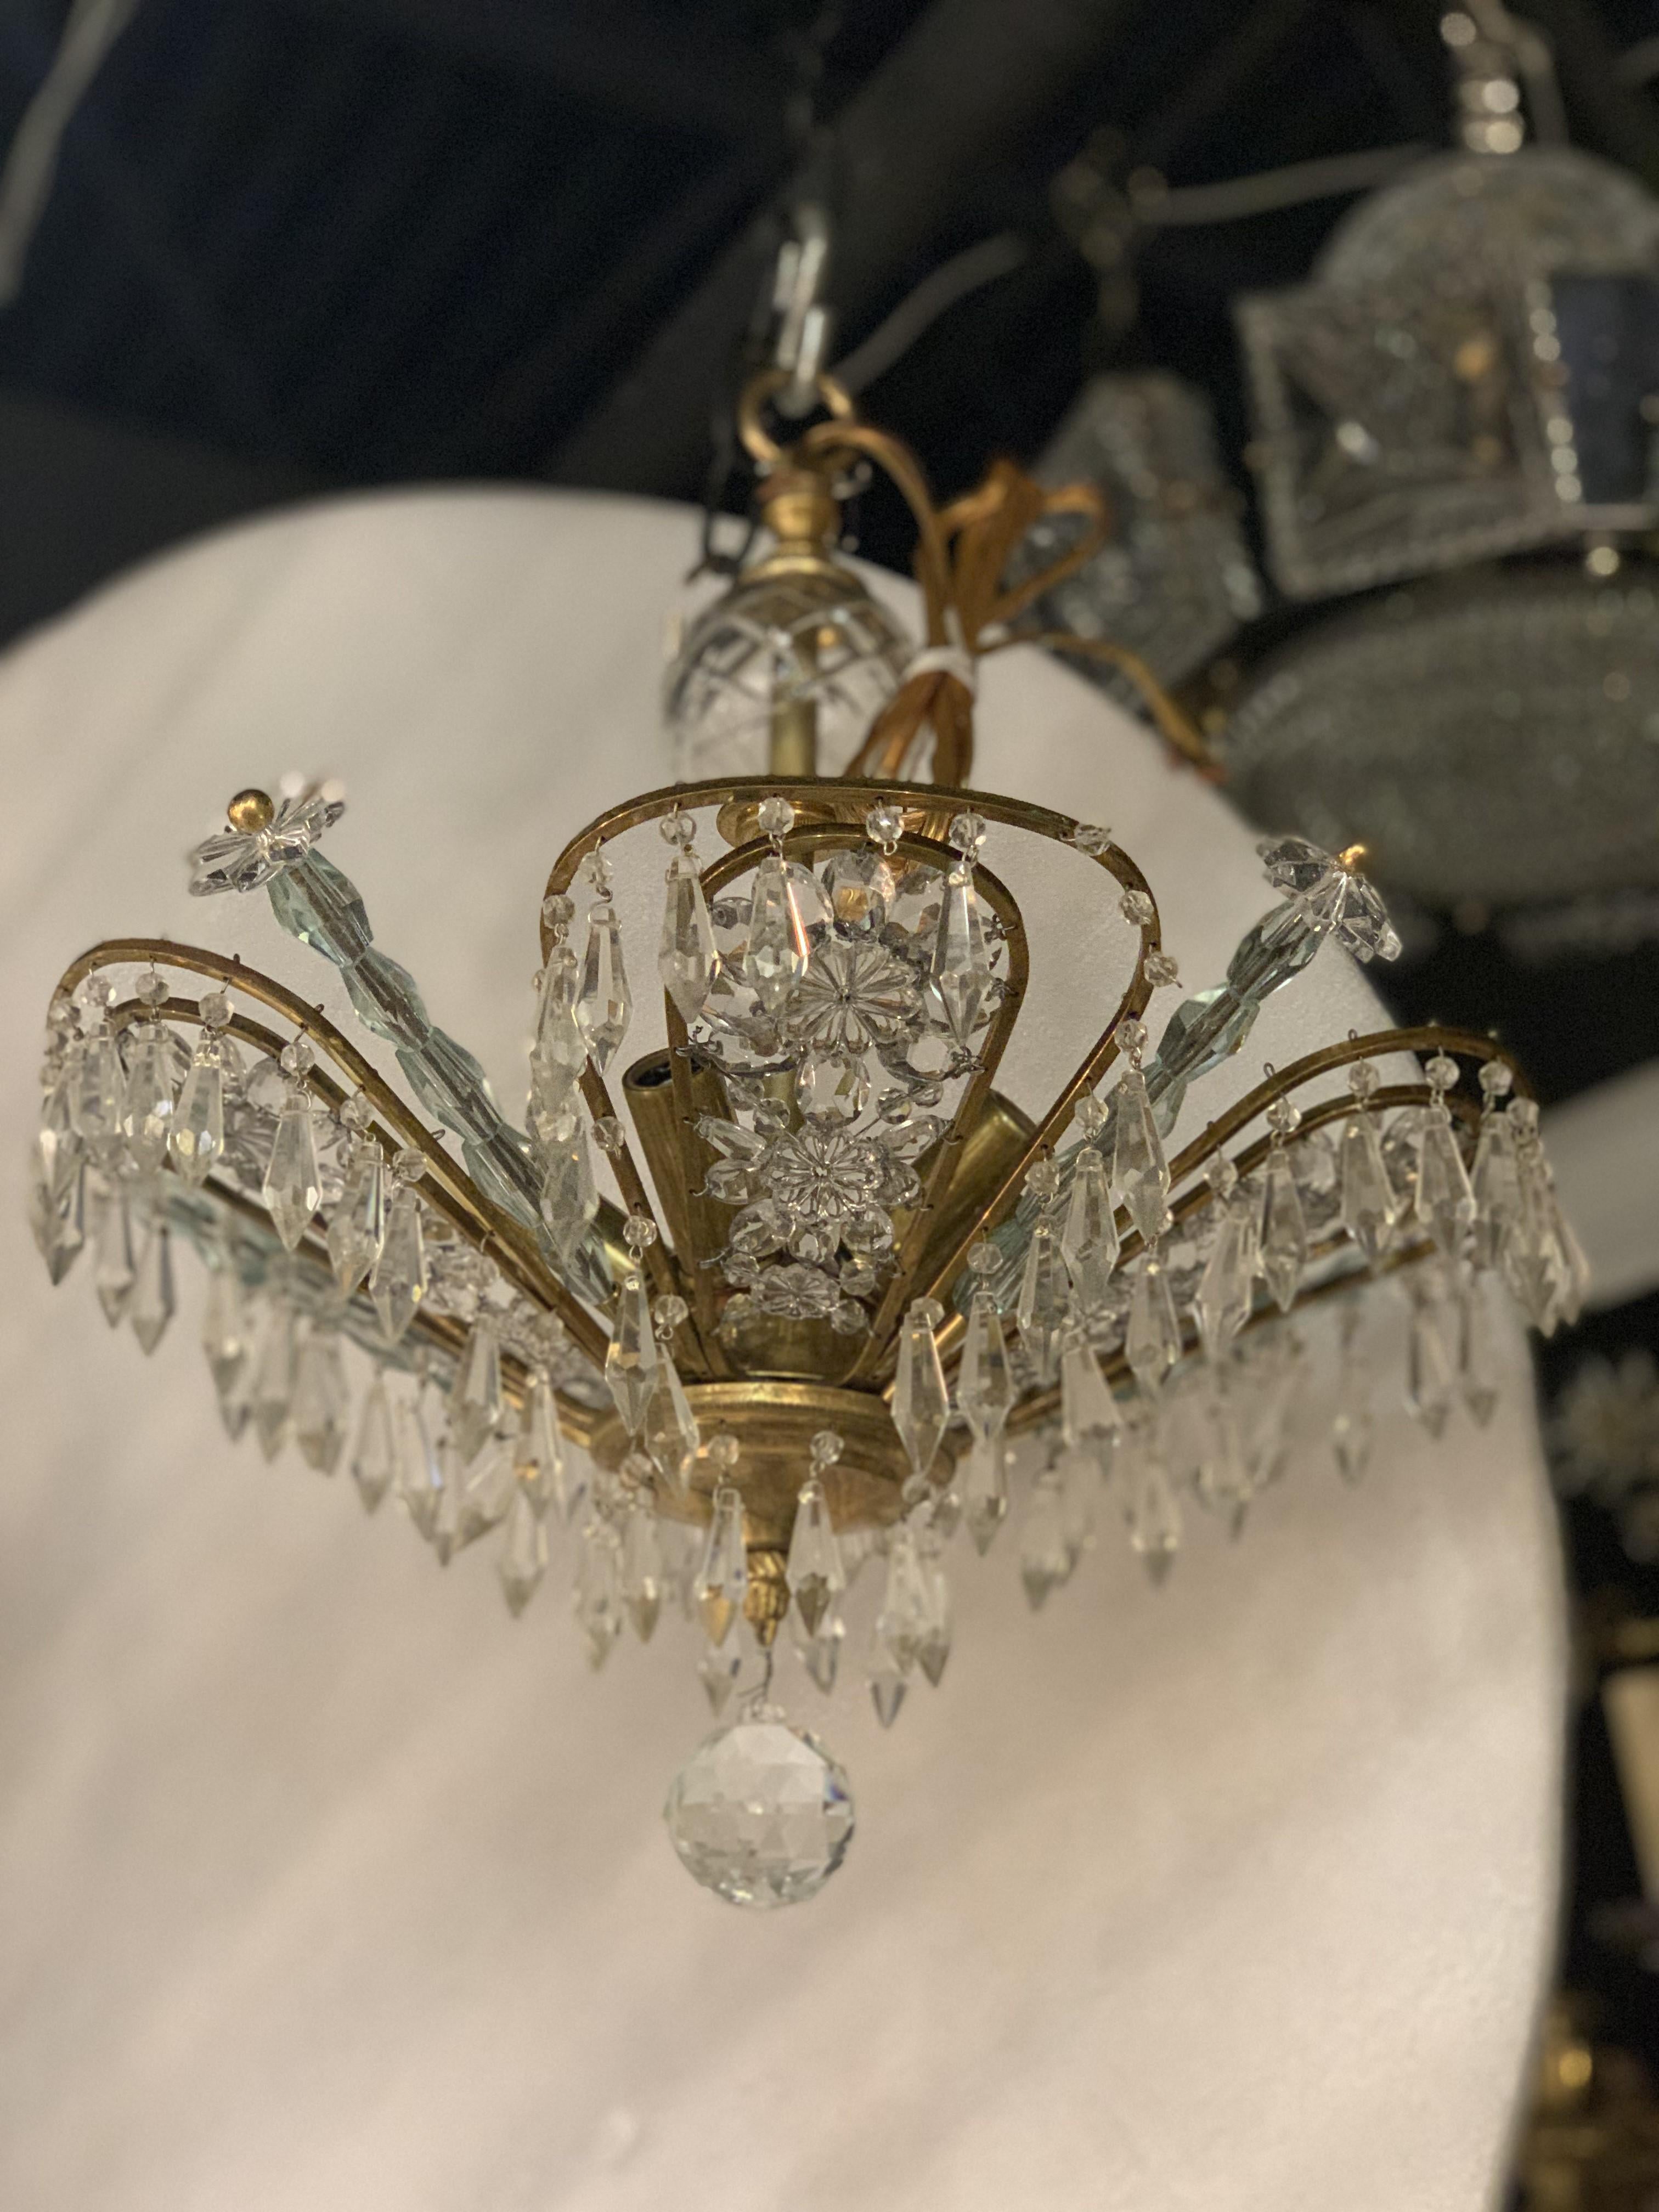 A circa 1930's French light fixtures with flowers crystals inset, and 4 interior lights probably Bagues, from Hotel in Paris. (4 available)